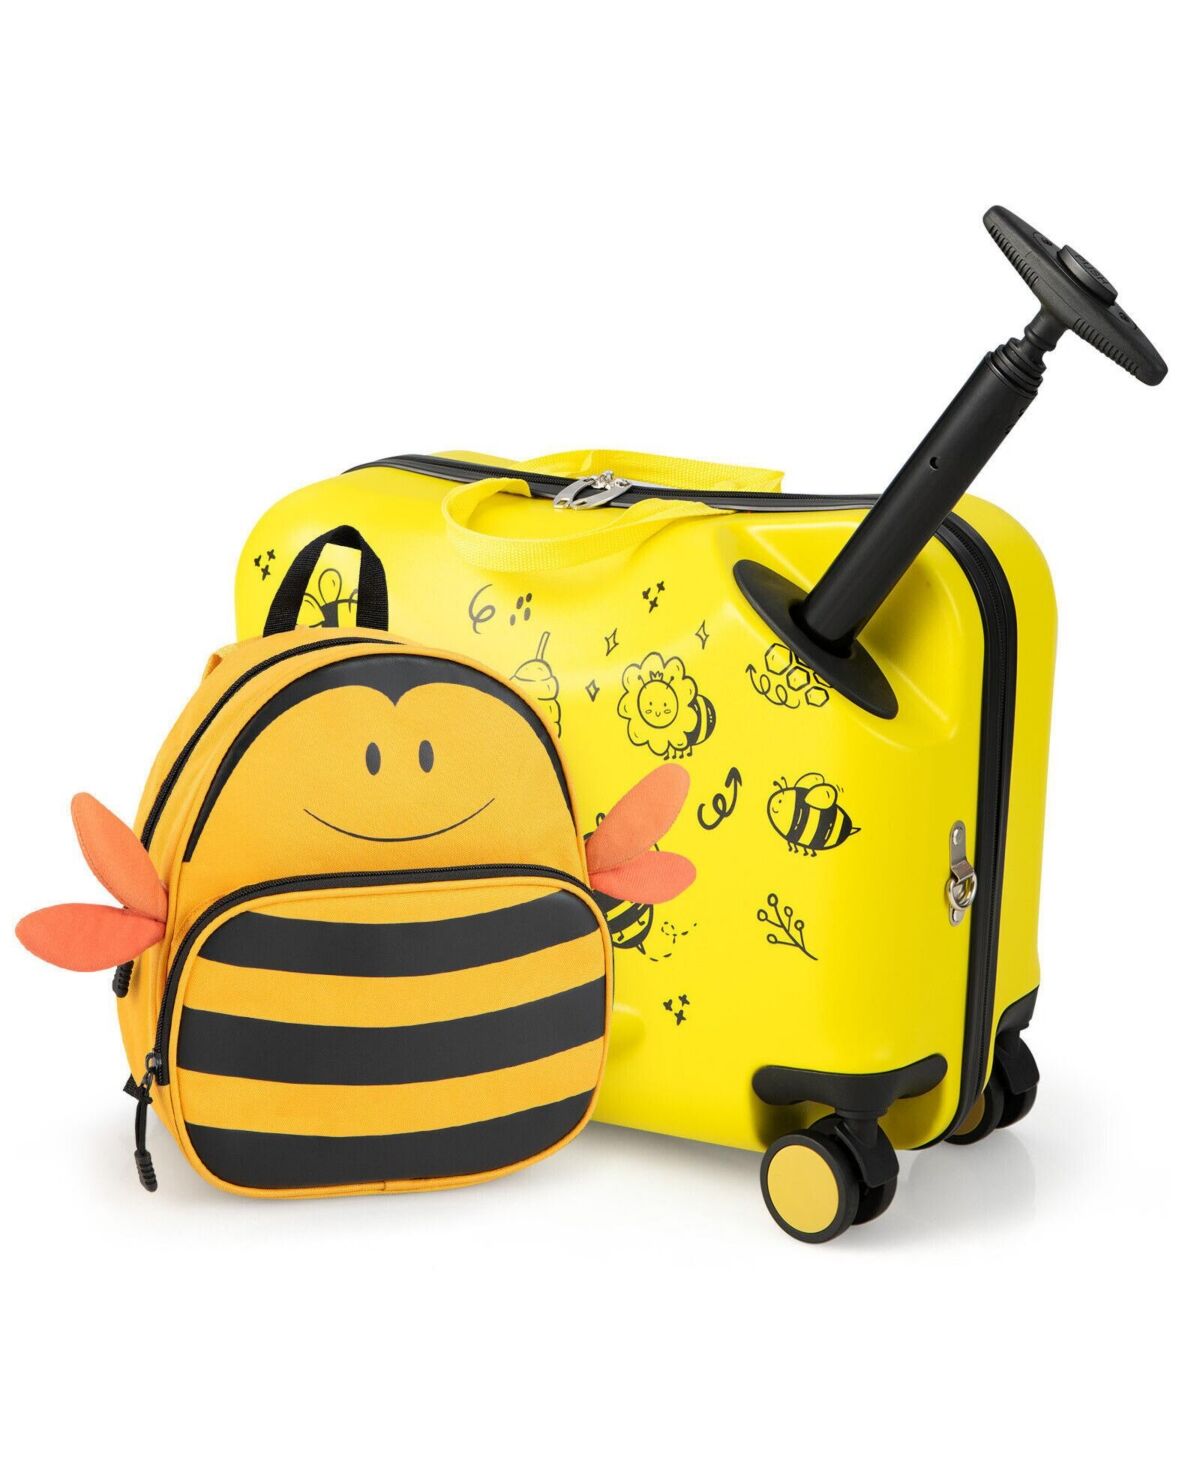 Slickblue 2 Pieces Ride-on Kids Luggage Set with Spinner Wheels and Bee Pattern-Yellow - Yellow